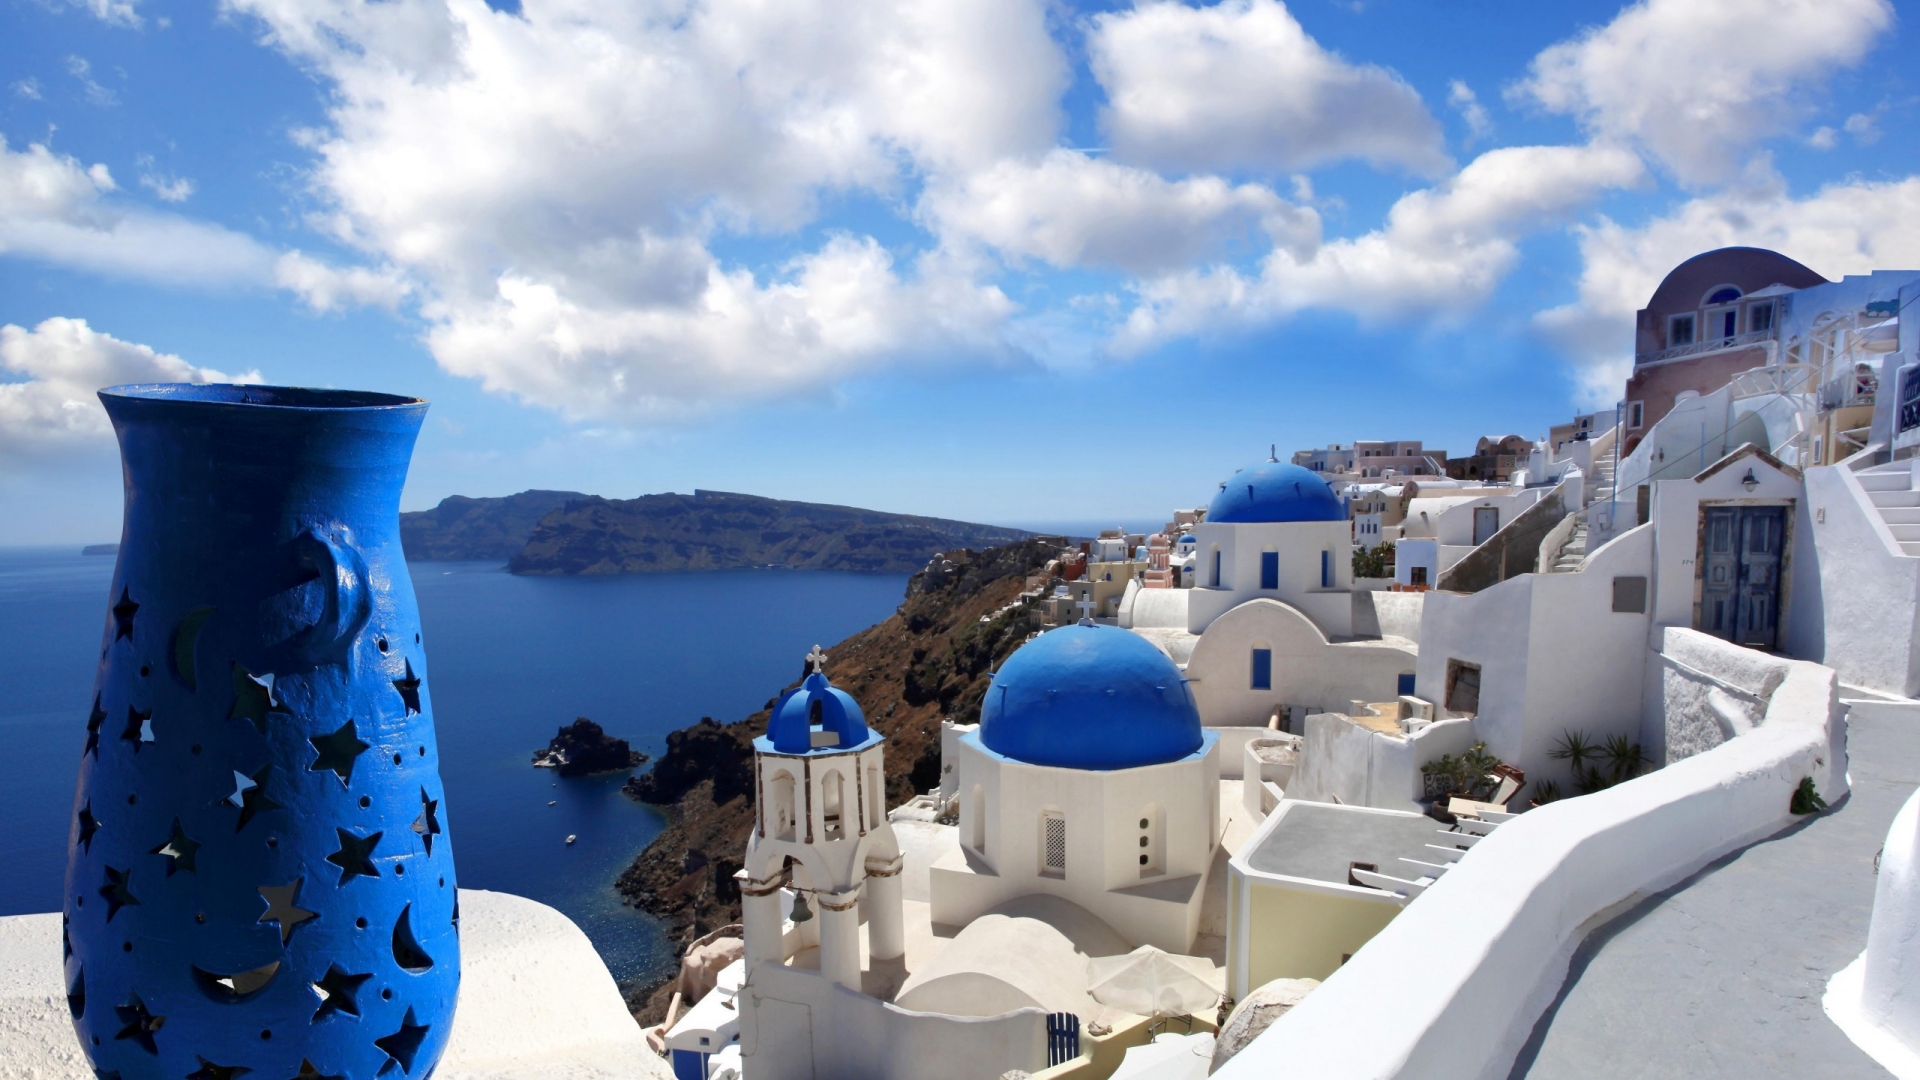 Ideal View from Santorini for 1920 x 1080 HDTV 1080p resolution